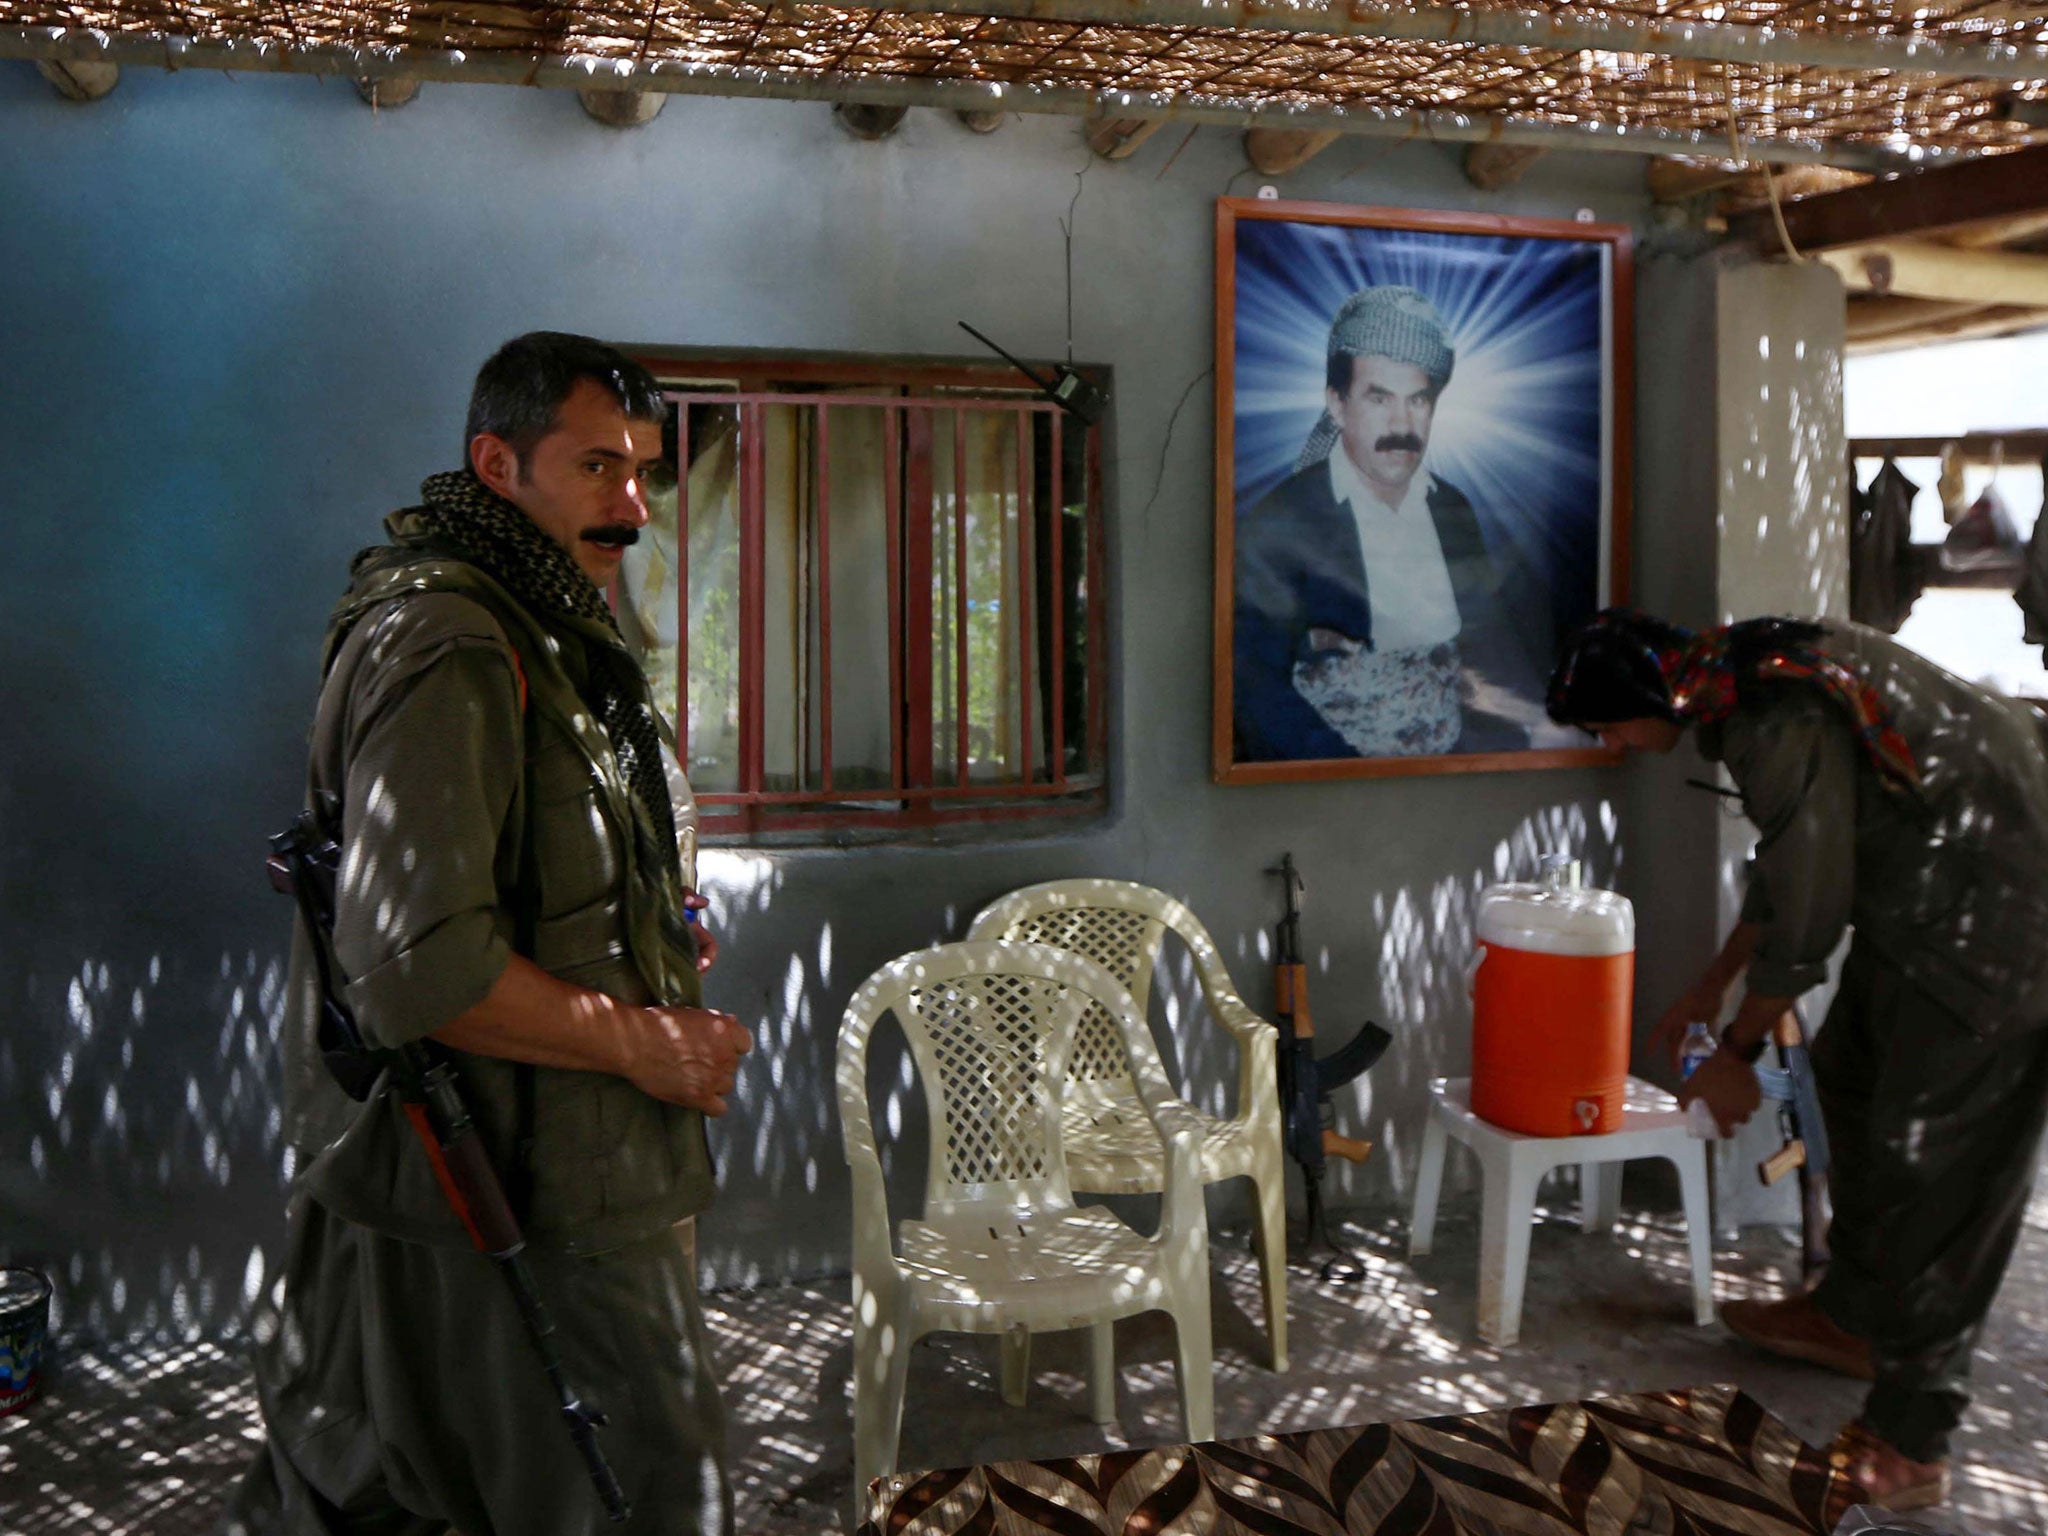 Members of the Kurdistan Workers' Party (PKK) rest in front of a portrait of jailed Kurdish rebel chief Abdullah Ocalan at a camp on July 29, 2015